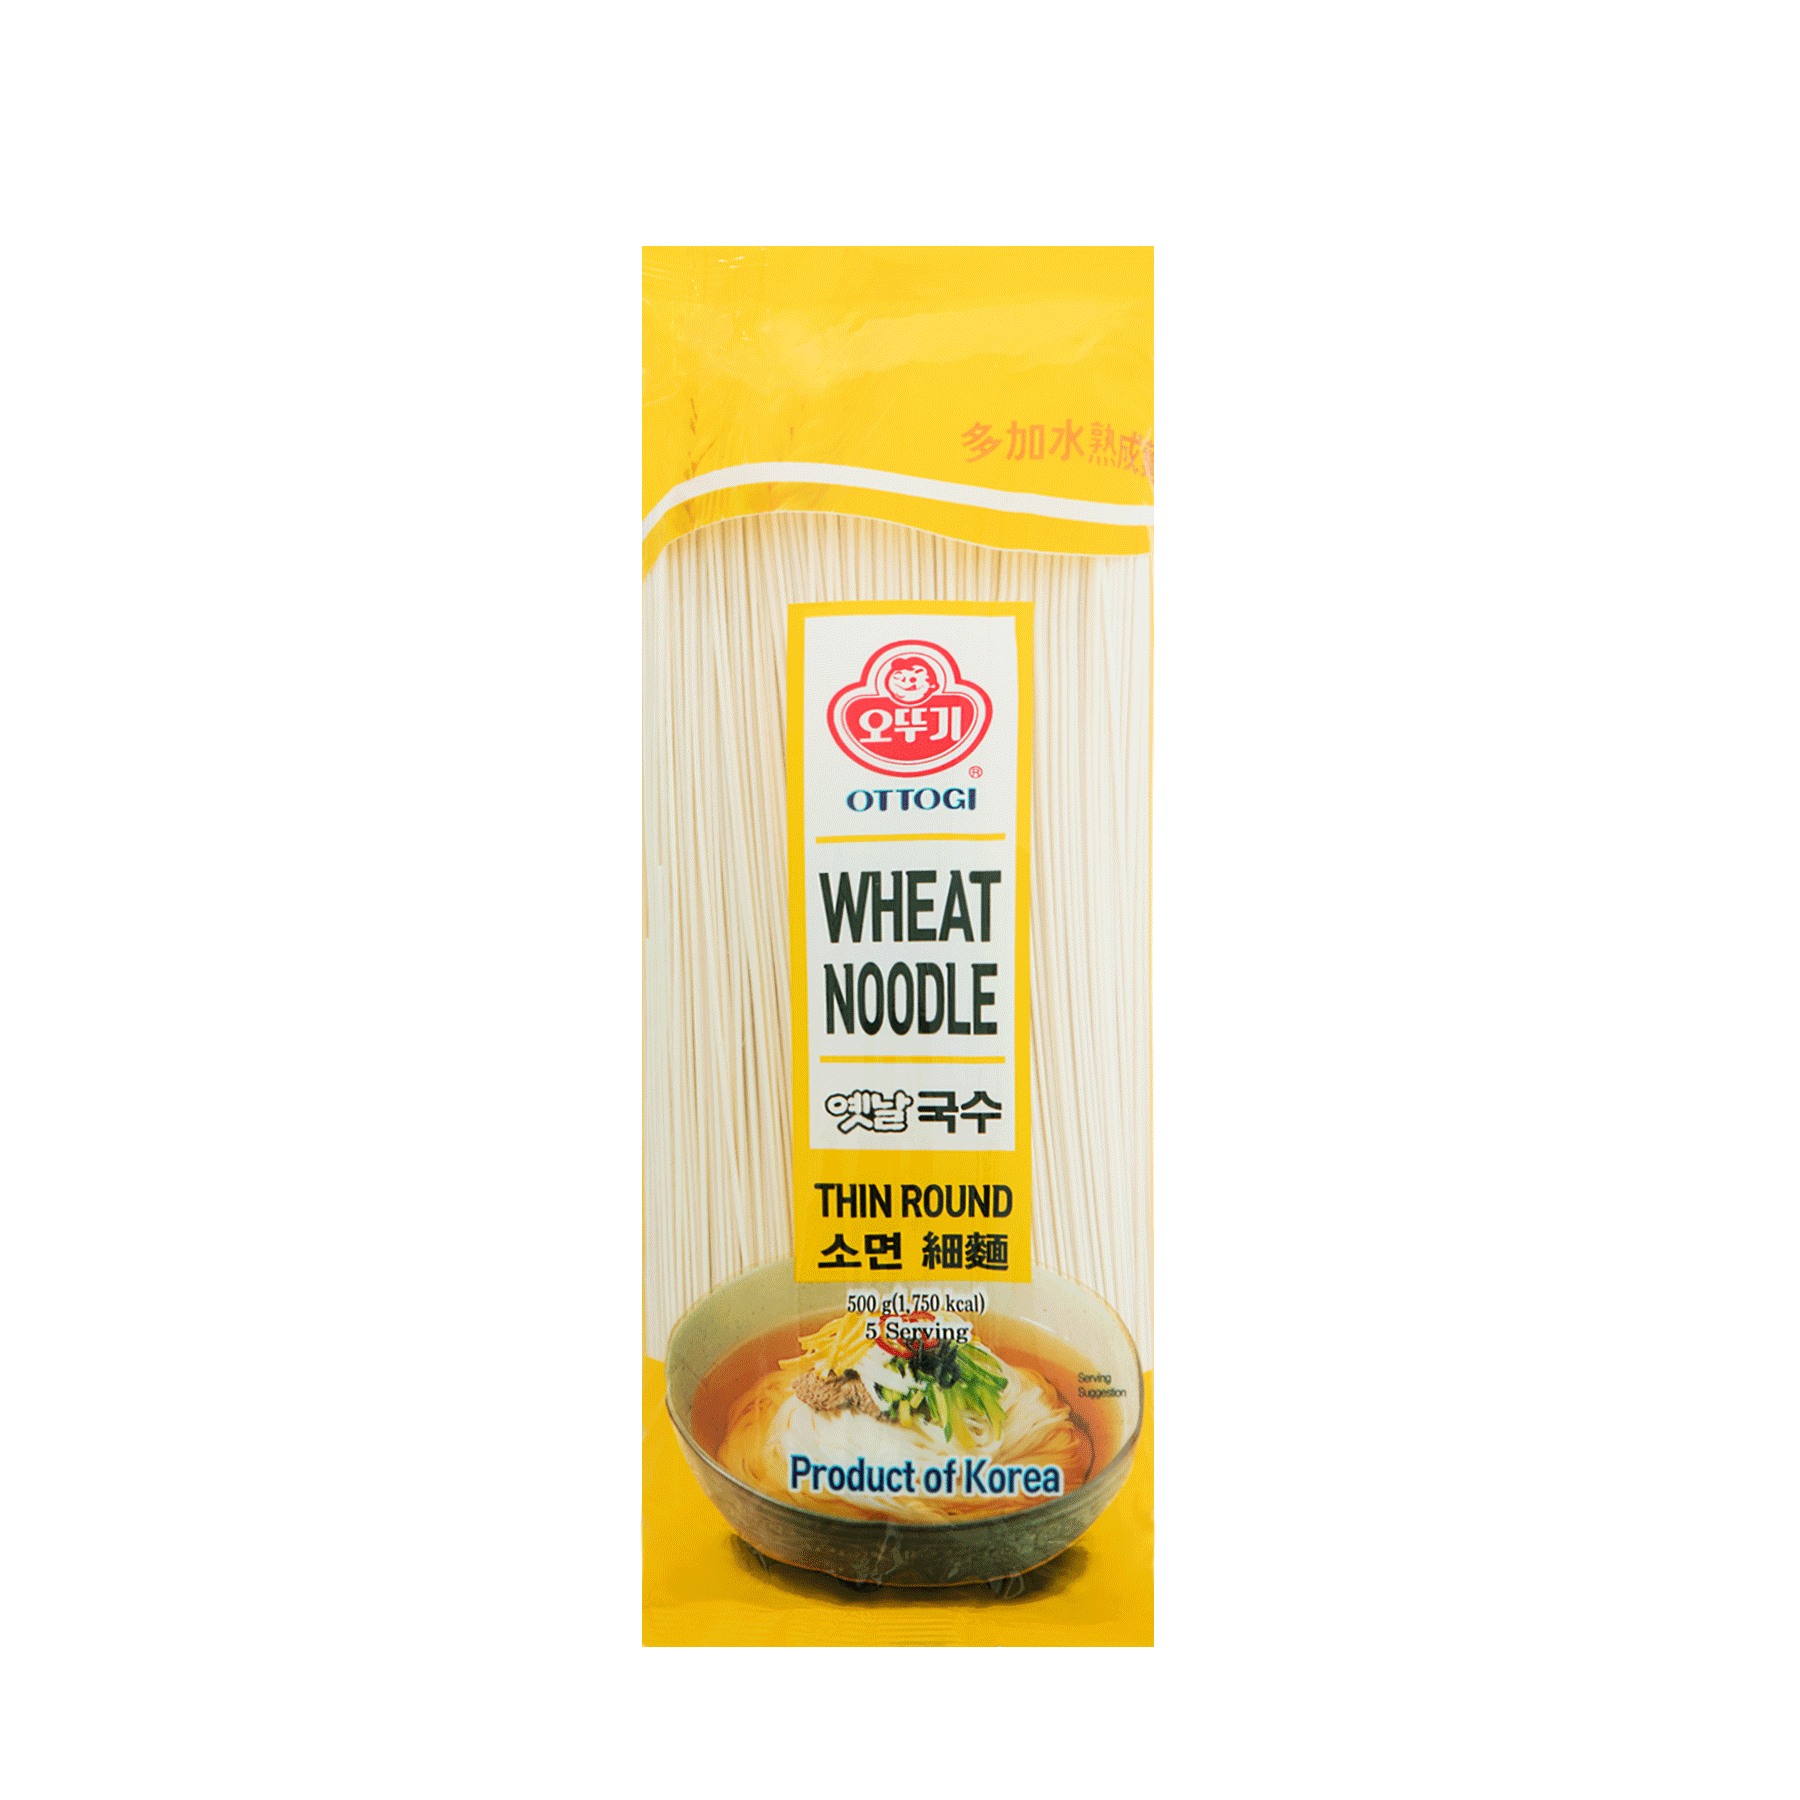 Wheat Noodle (Thin Round) 500g